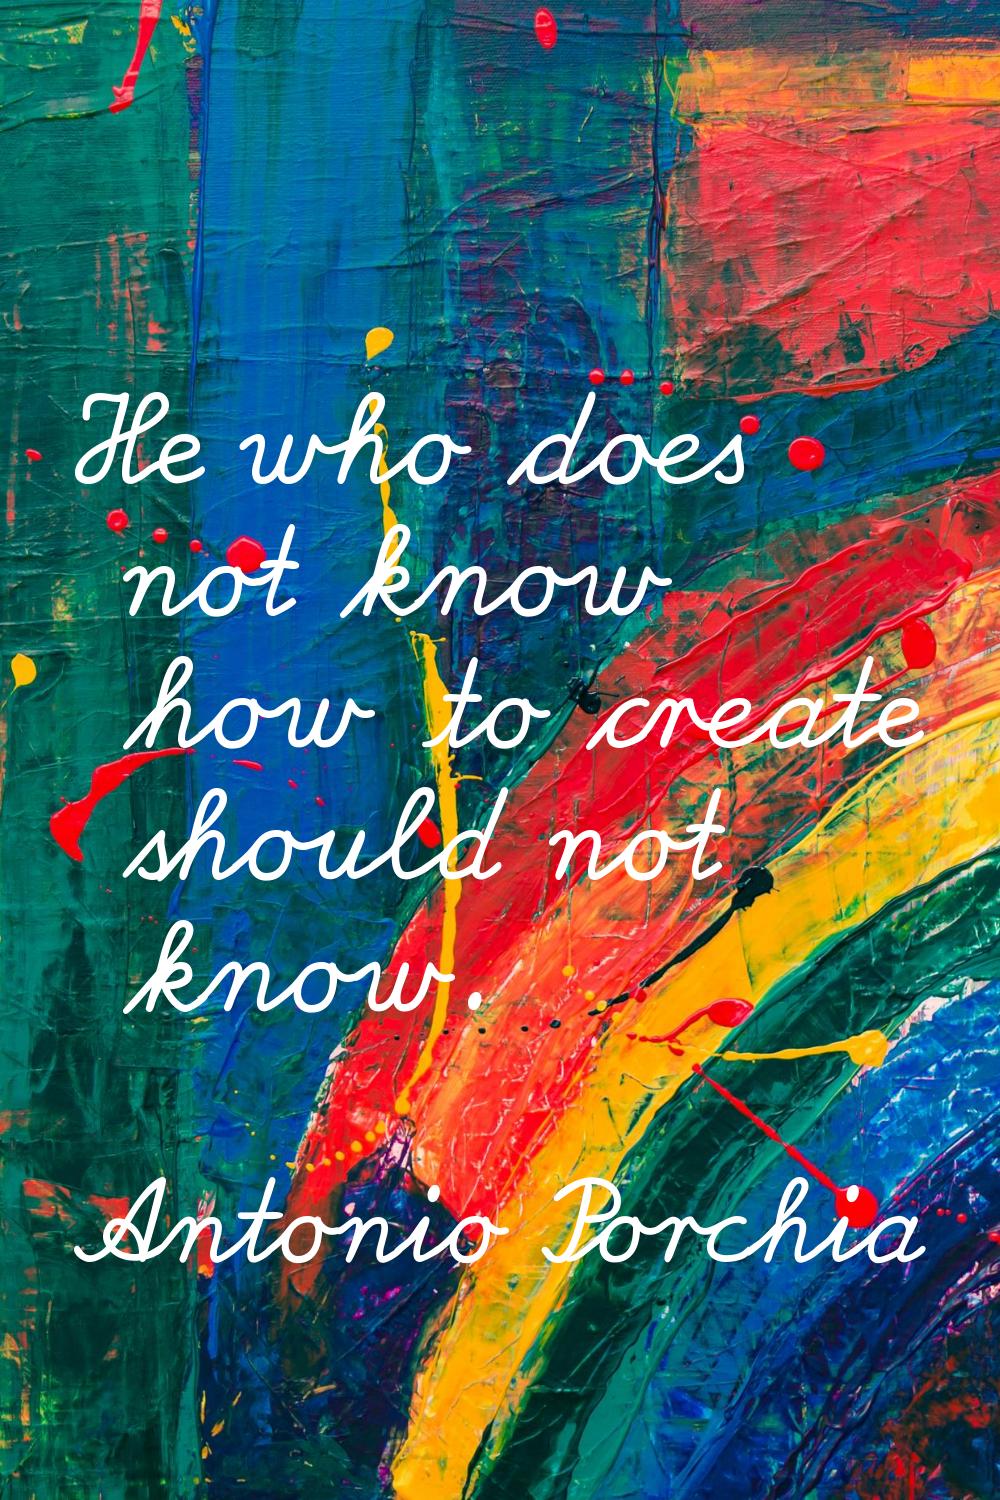 He who does not know how to create should not know.